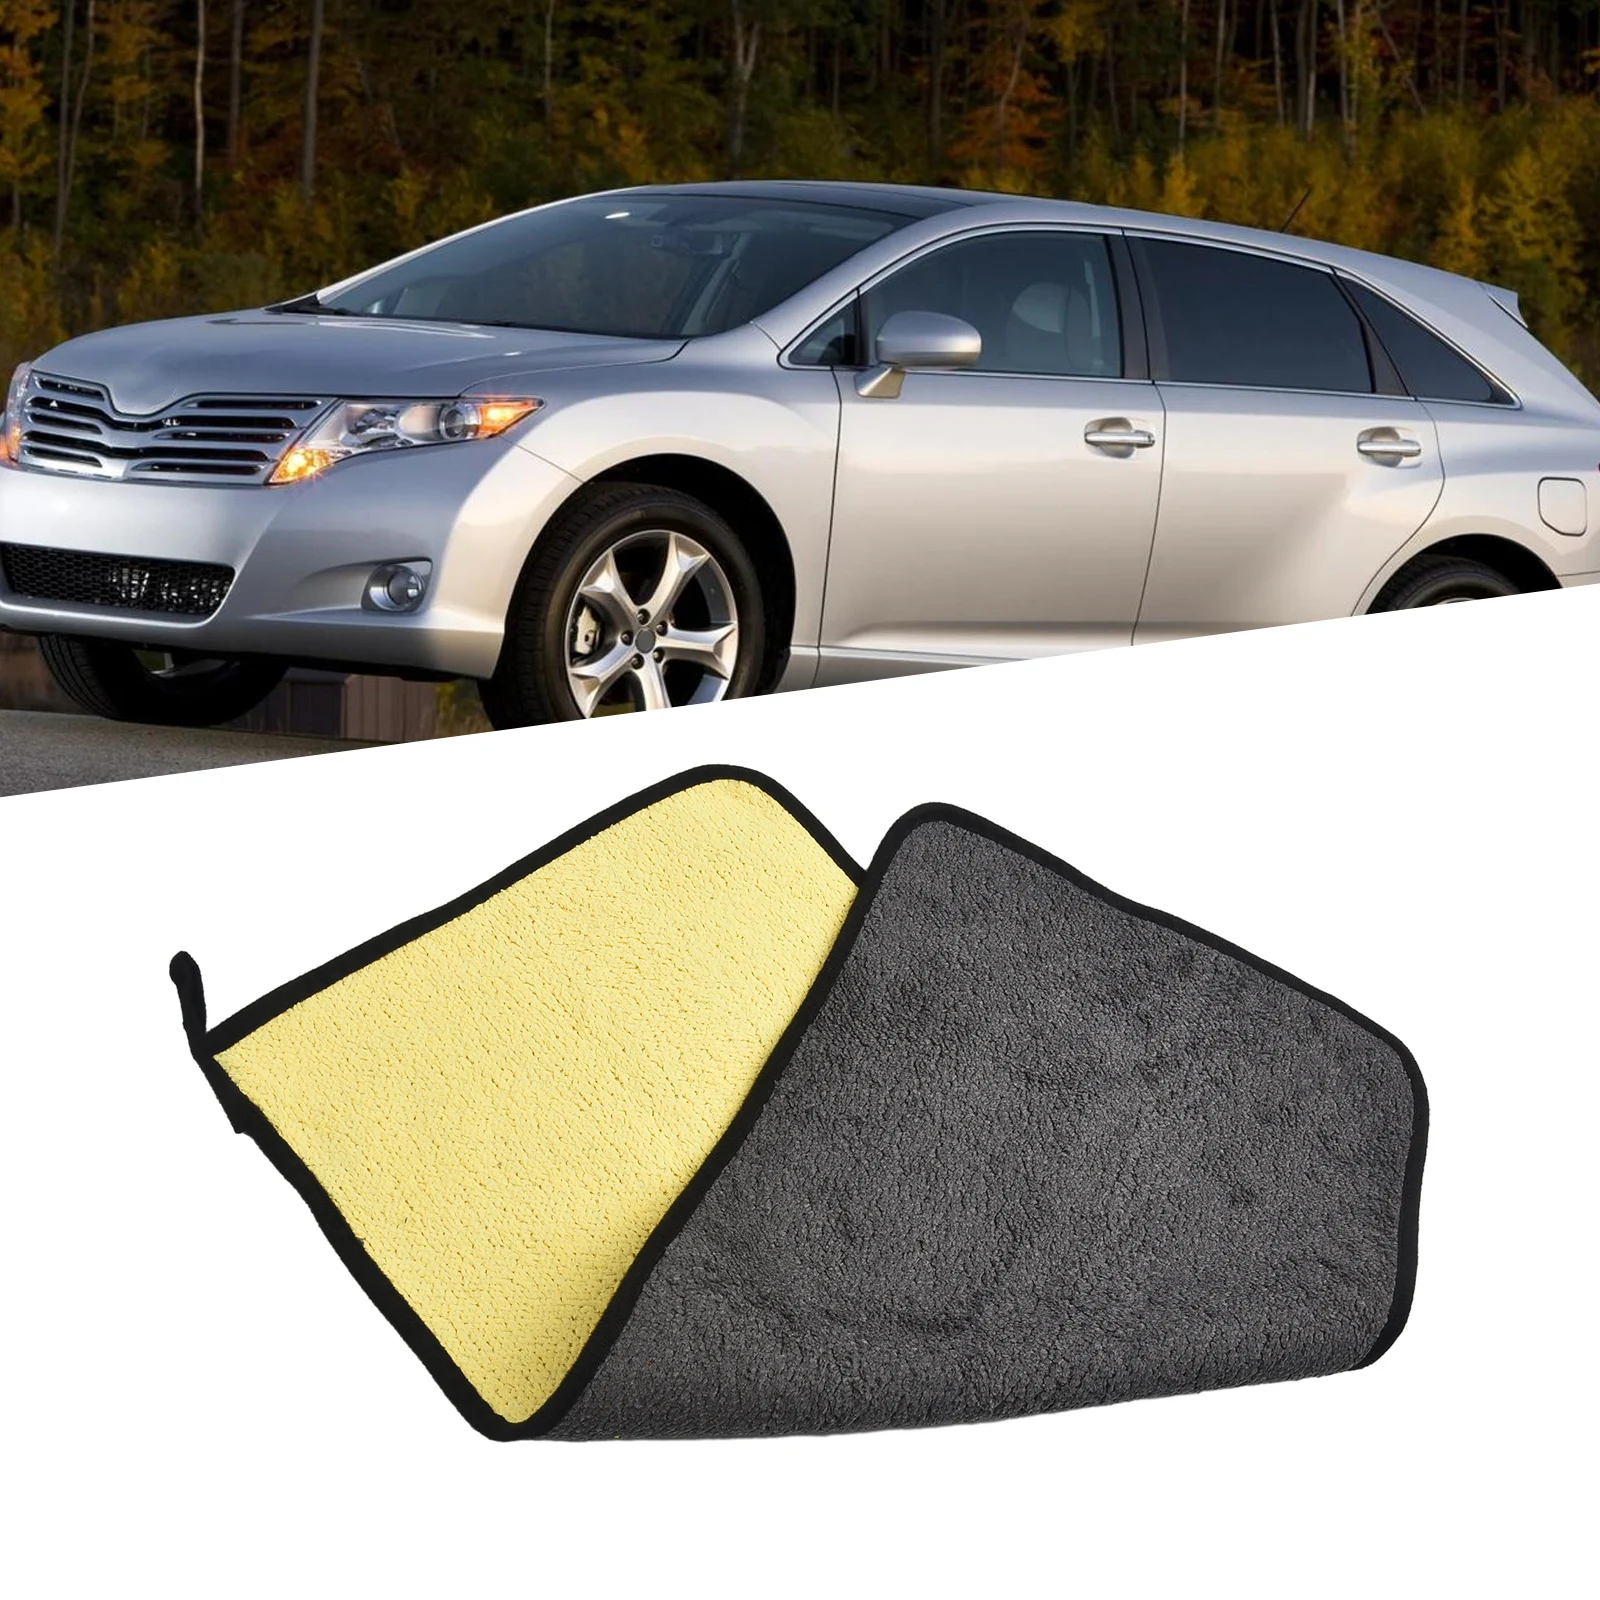 

Car Washing Towel Casement Dish Cleaning Cloth Rag Dry Strong Absorbent Soft Yellow Accessories For Vehicles